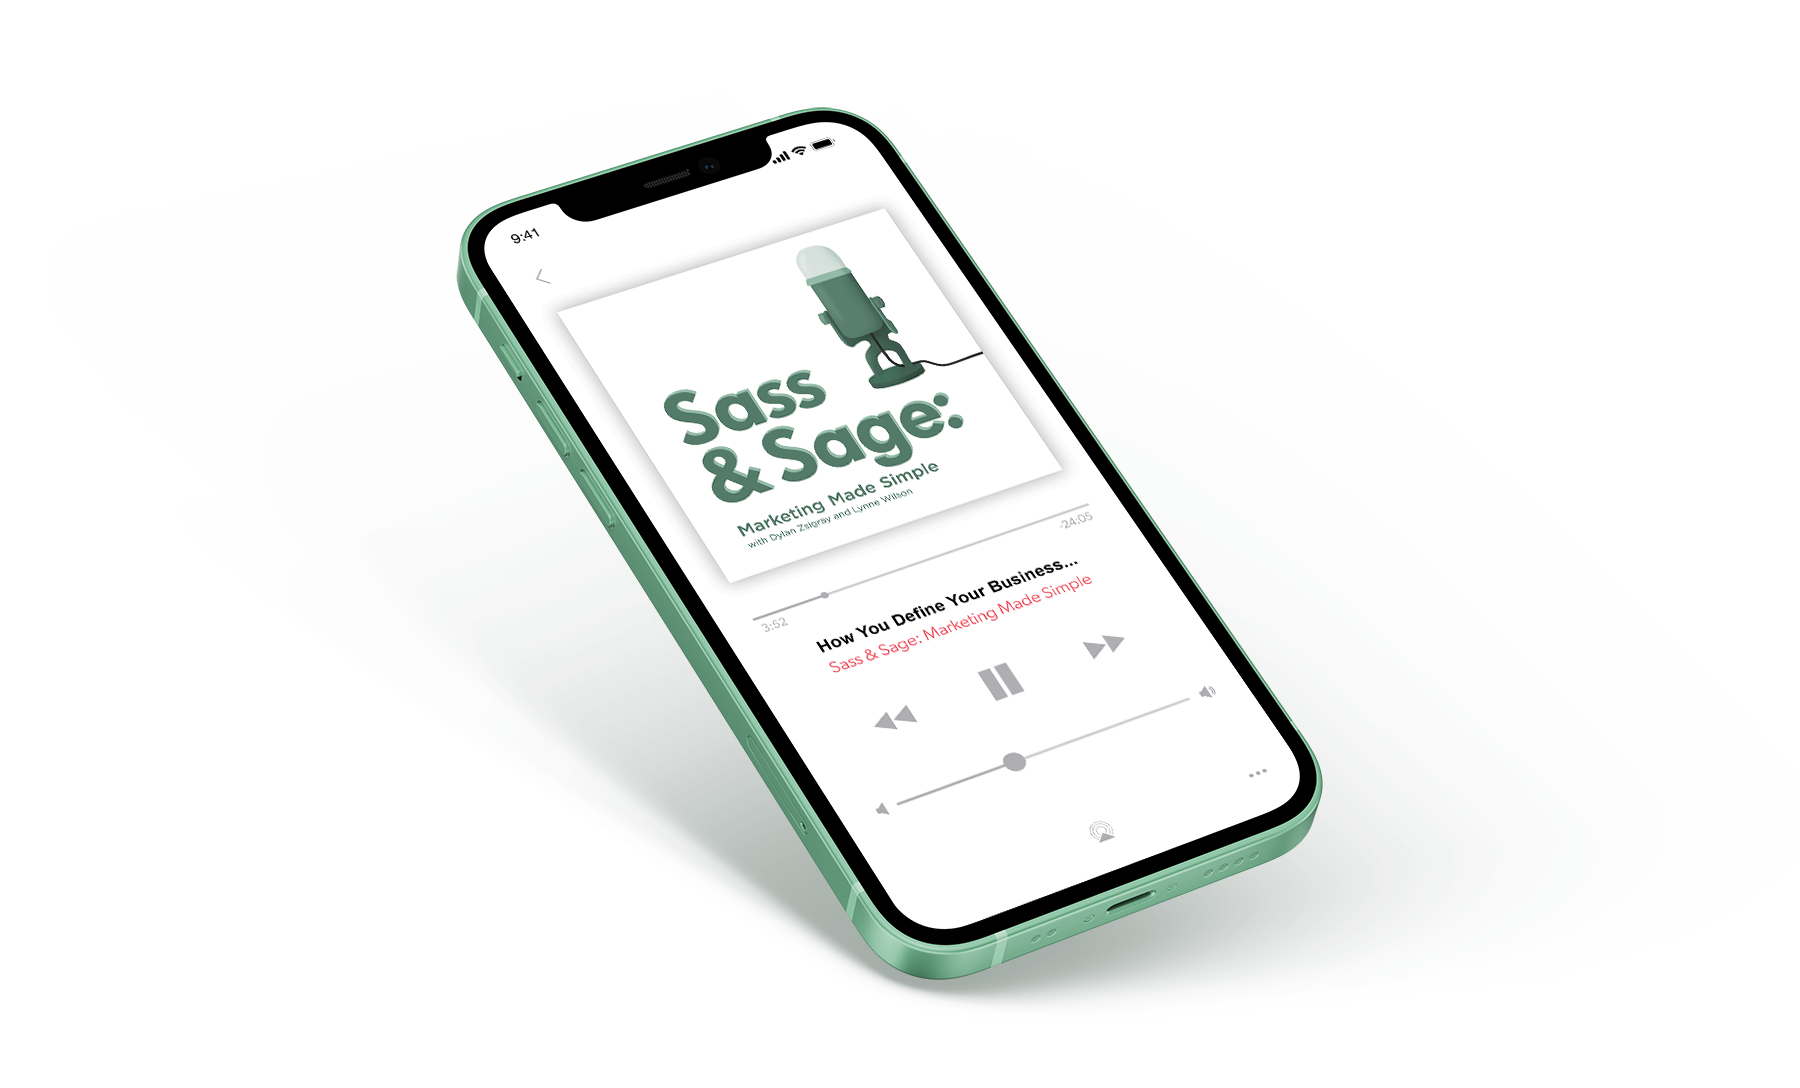 Mockup of Sass & Sage cover art on iPhone